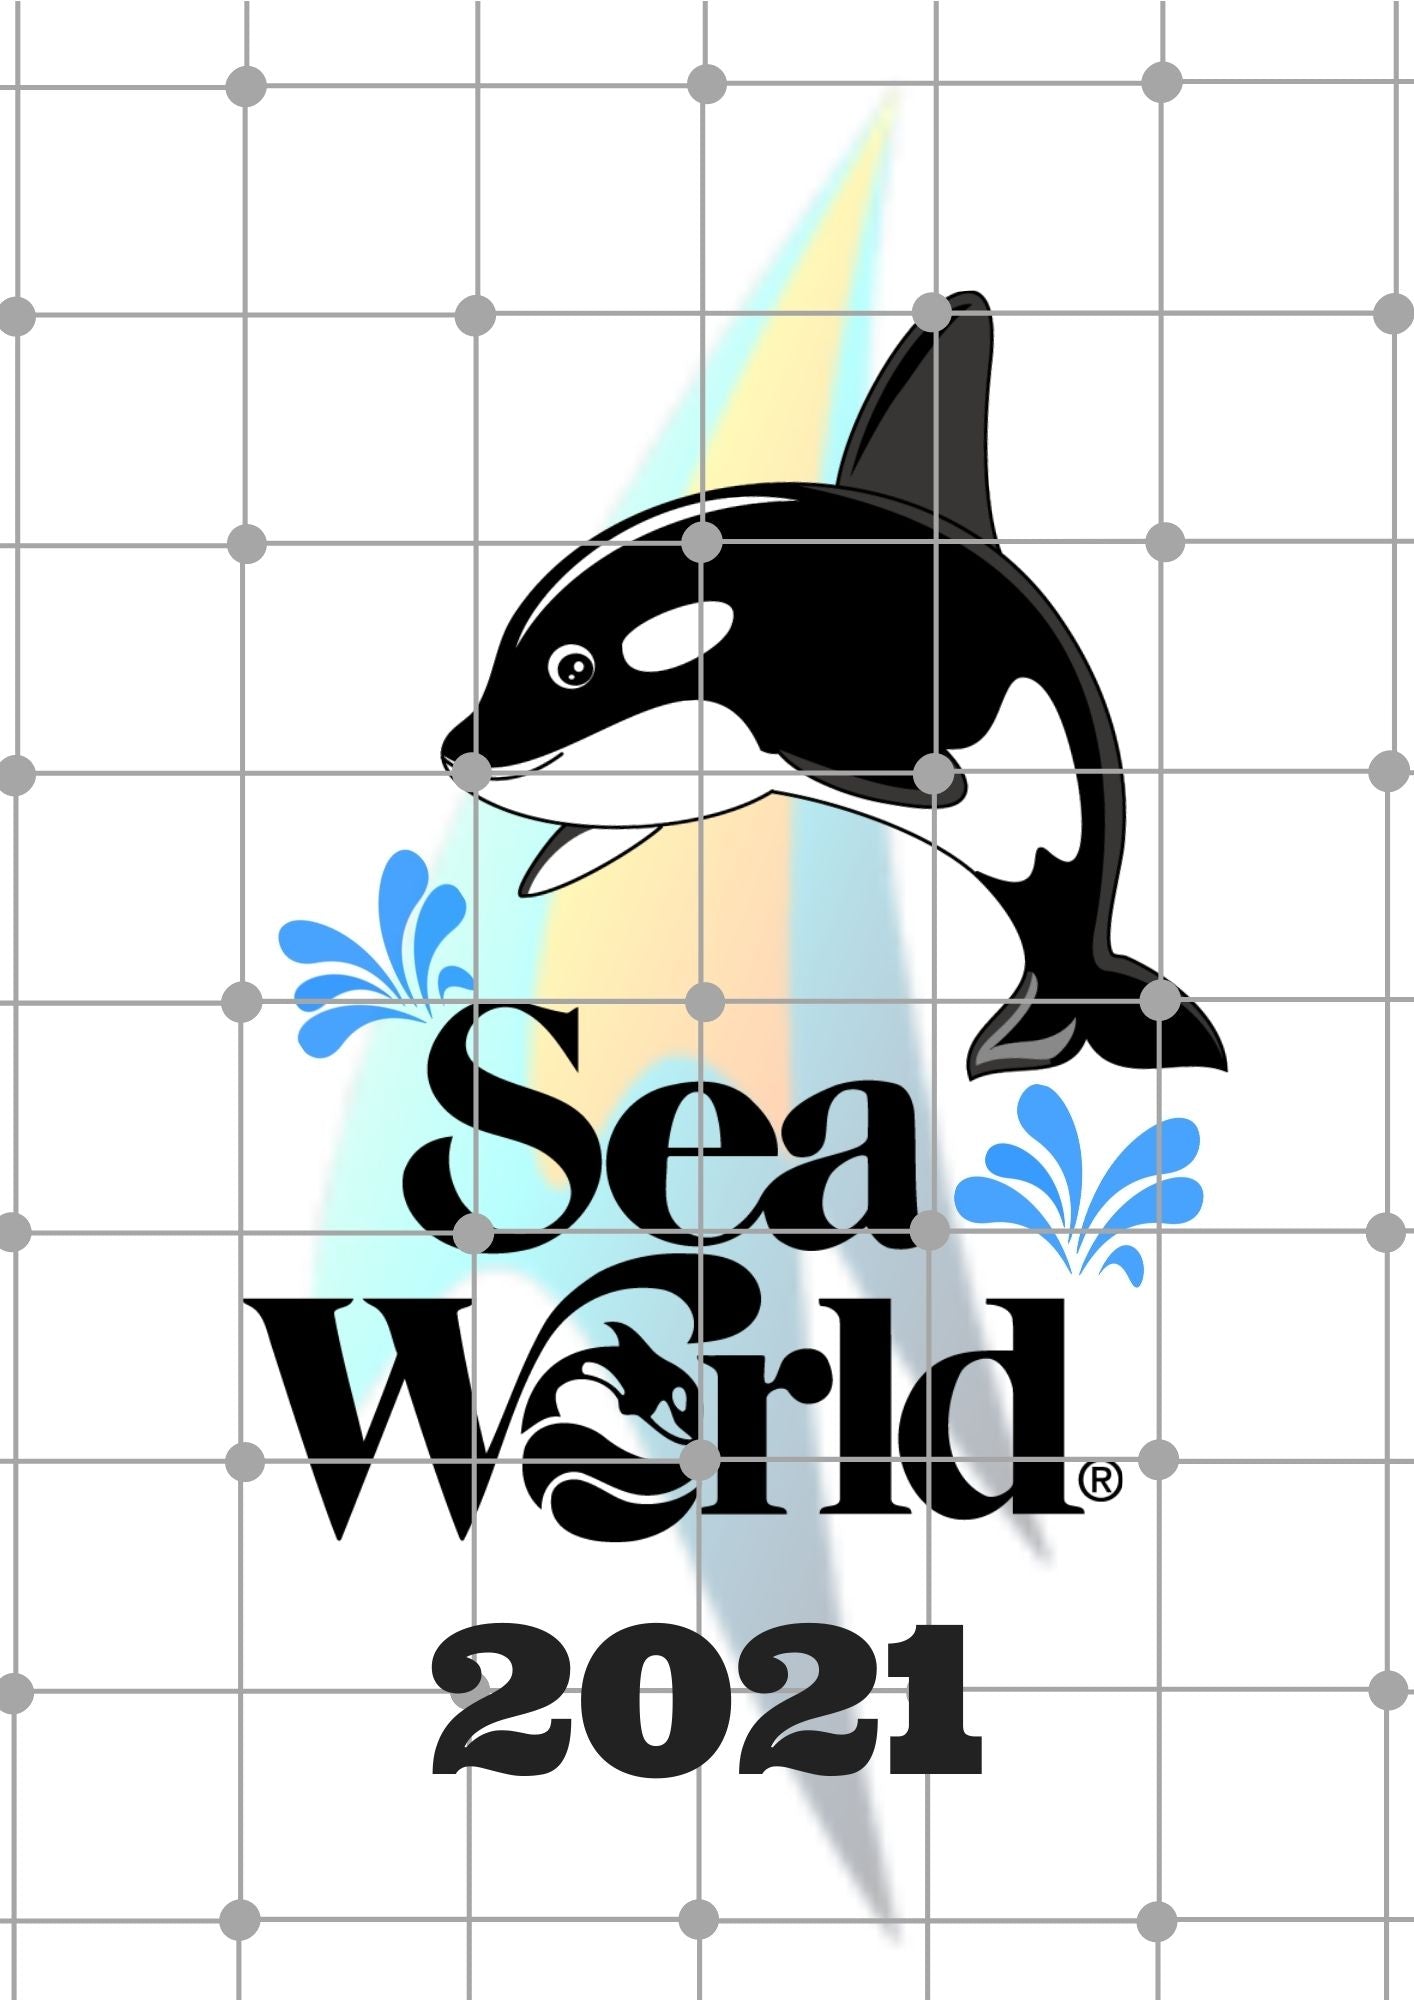 Seaworld Inspired Family Vacation| Printable Iron On Transfer For Diy Shirts